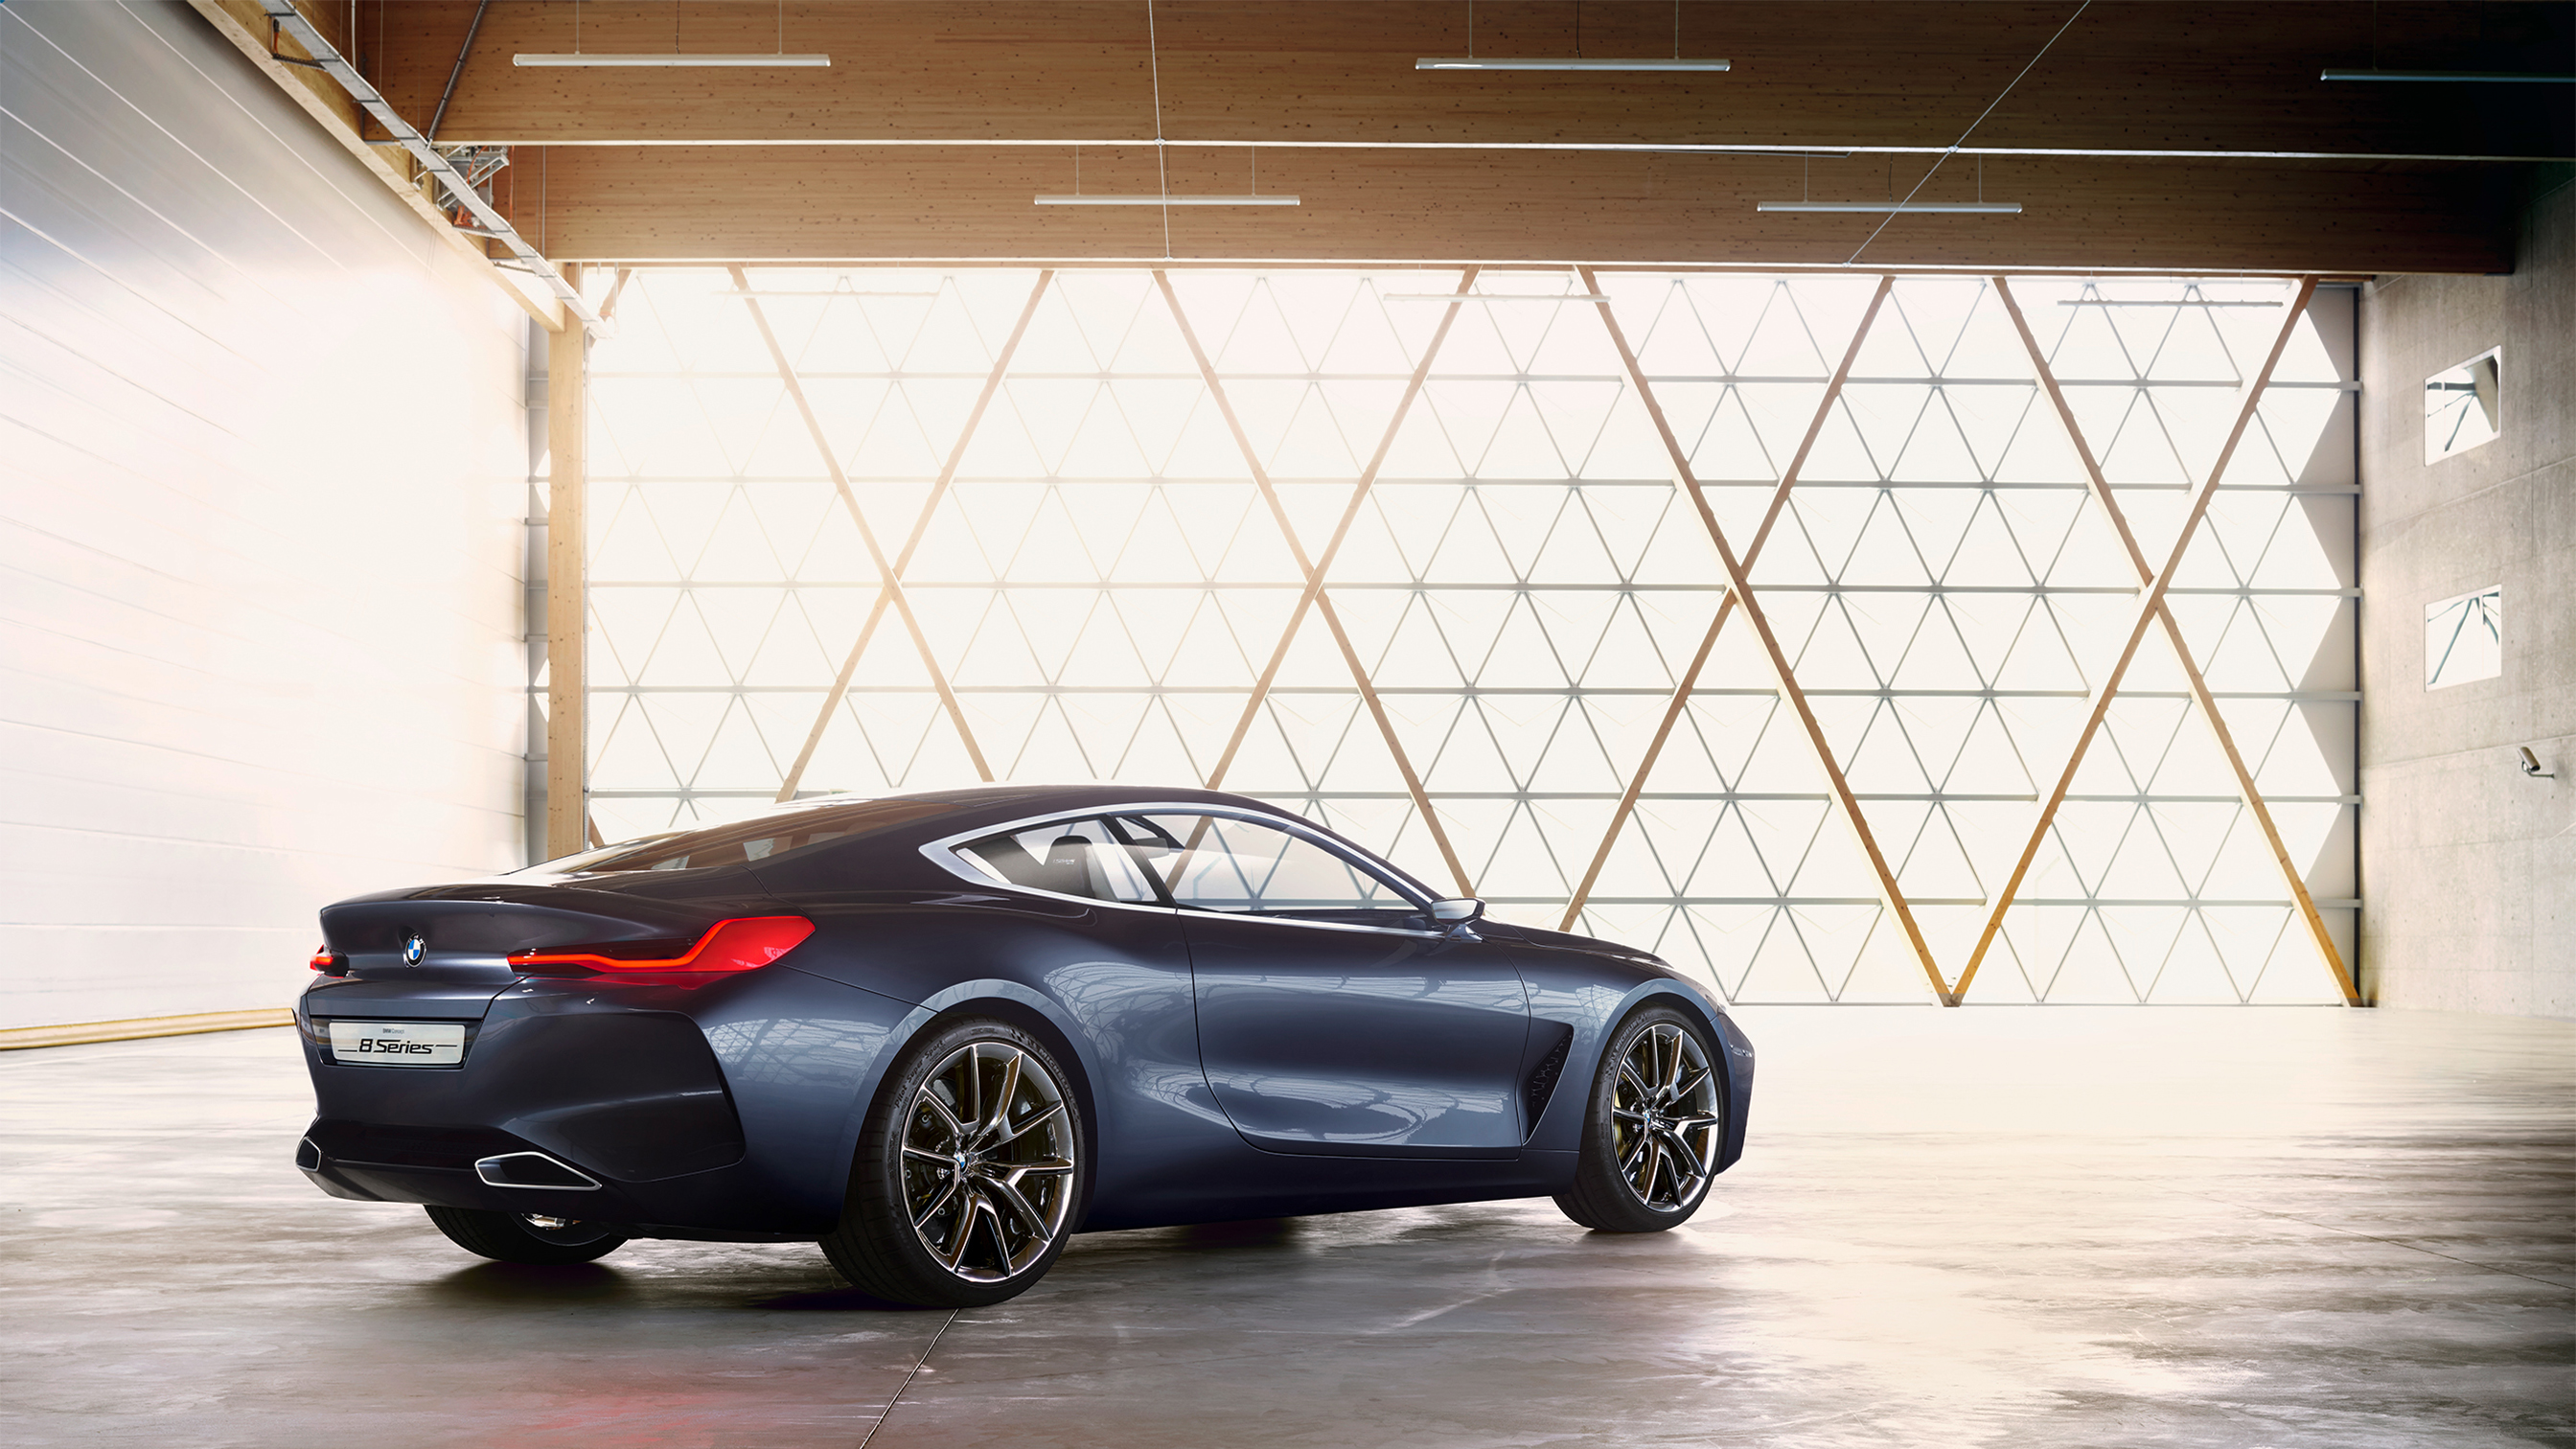 Vehicles BMW Concept 8 Series HD Wallpaper by Christian Kain